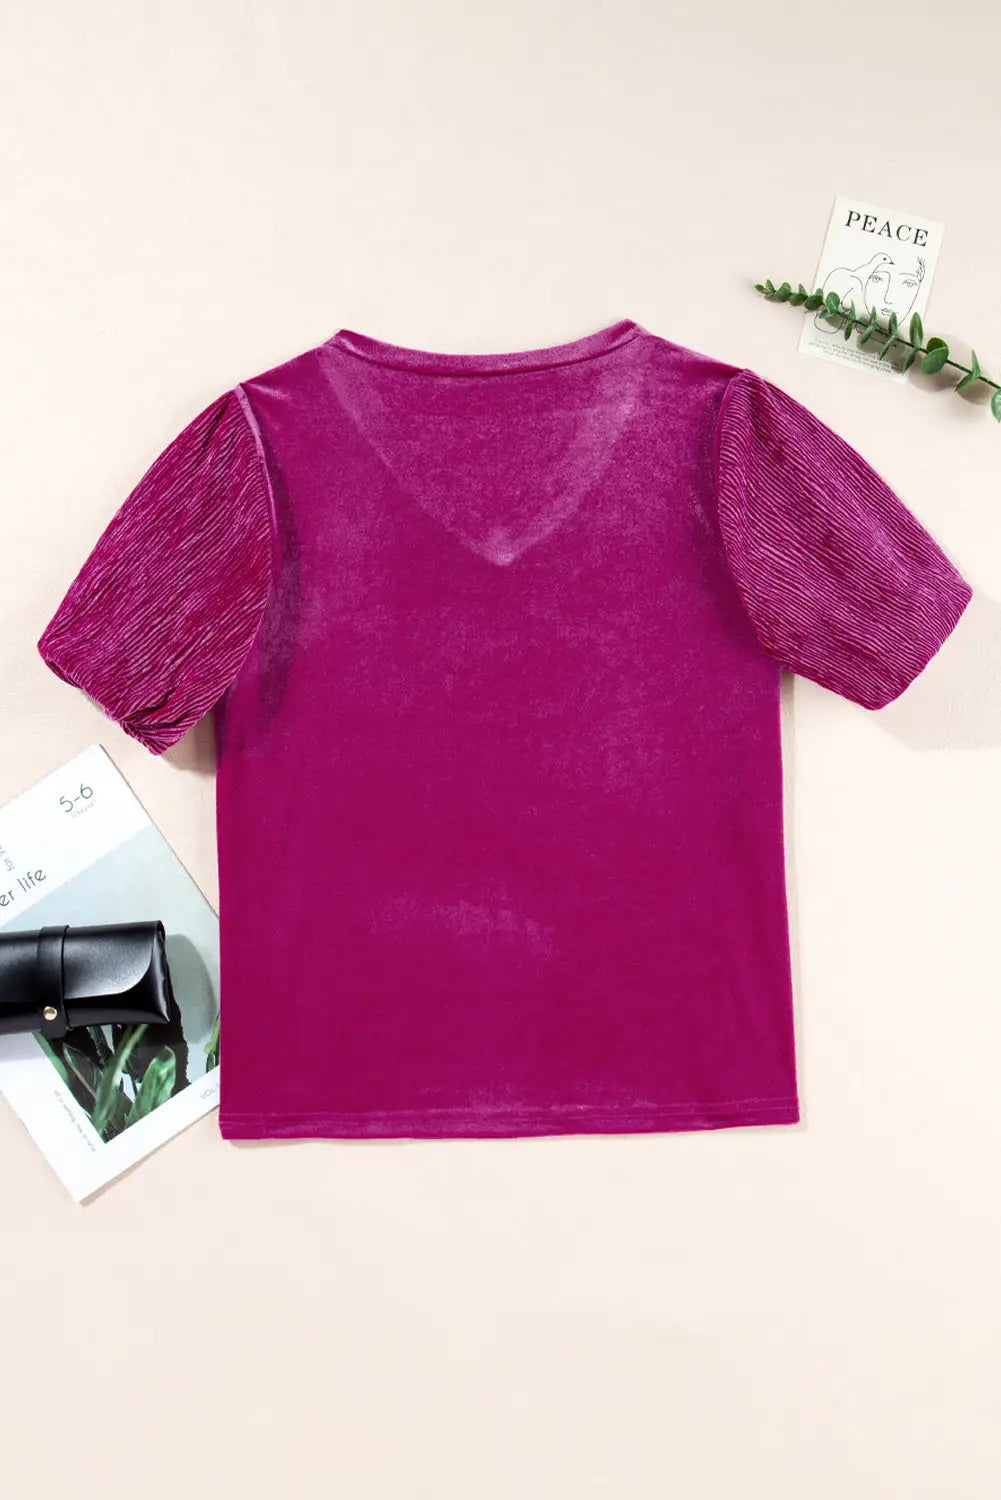 Bright pink pleated velvet top - tops/blouses & shirts